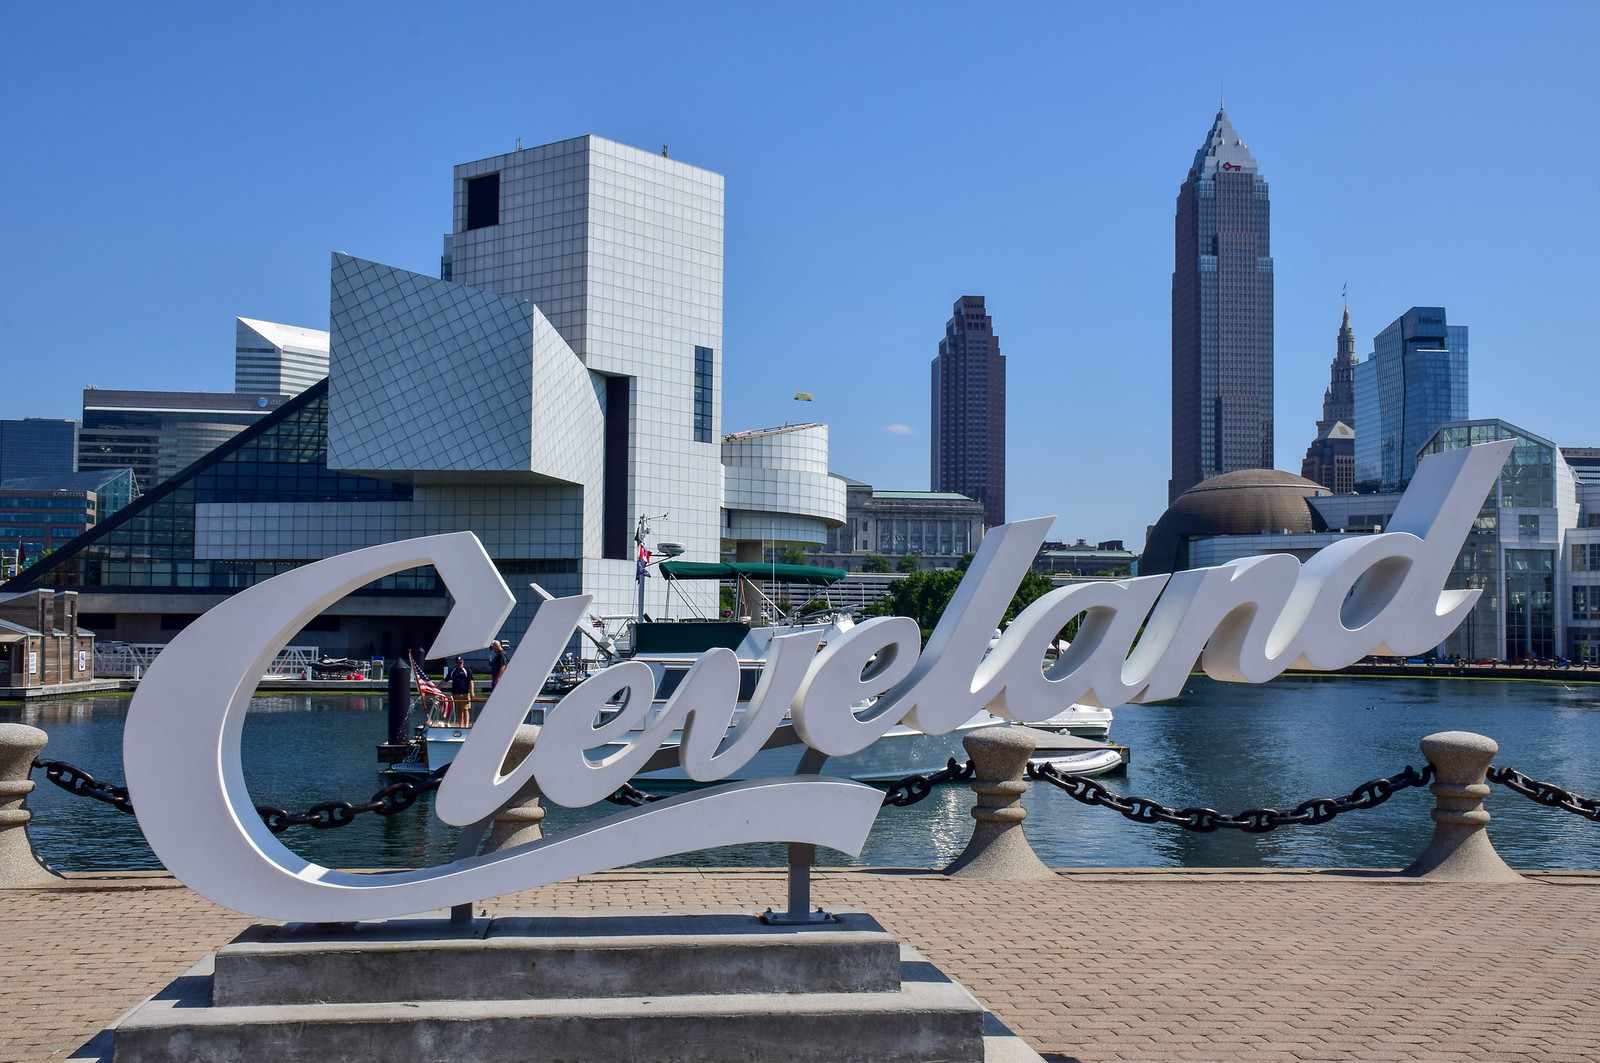 The Cleveland sign in front of the Rock and Roll Hall of Fame and city skyline